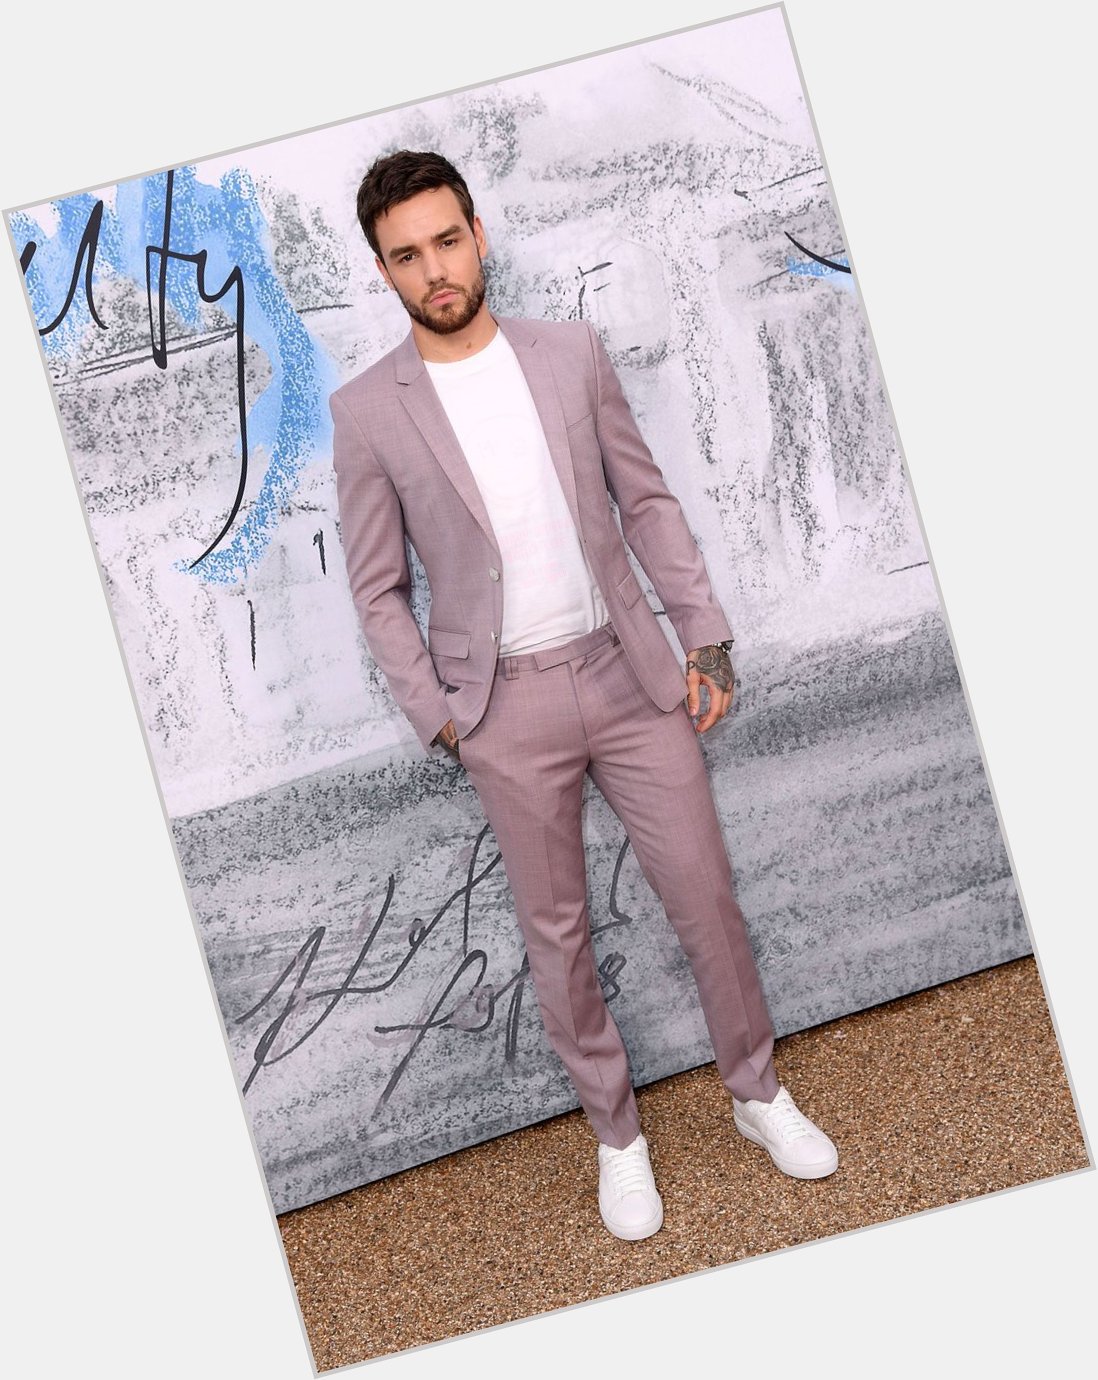 I LOVE LIAM PAYNE HAPPY BIRTHDAY TO MY FAVORITE MAN OF THE HOUR  